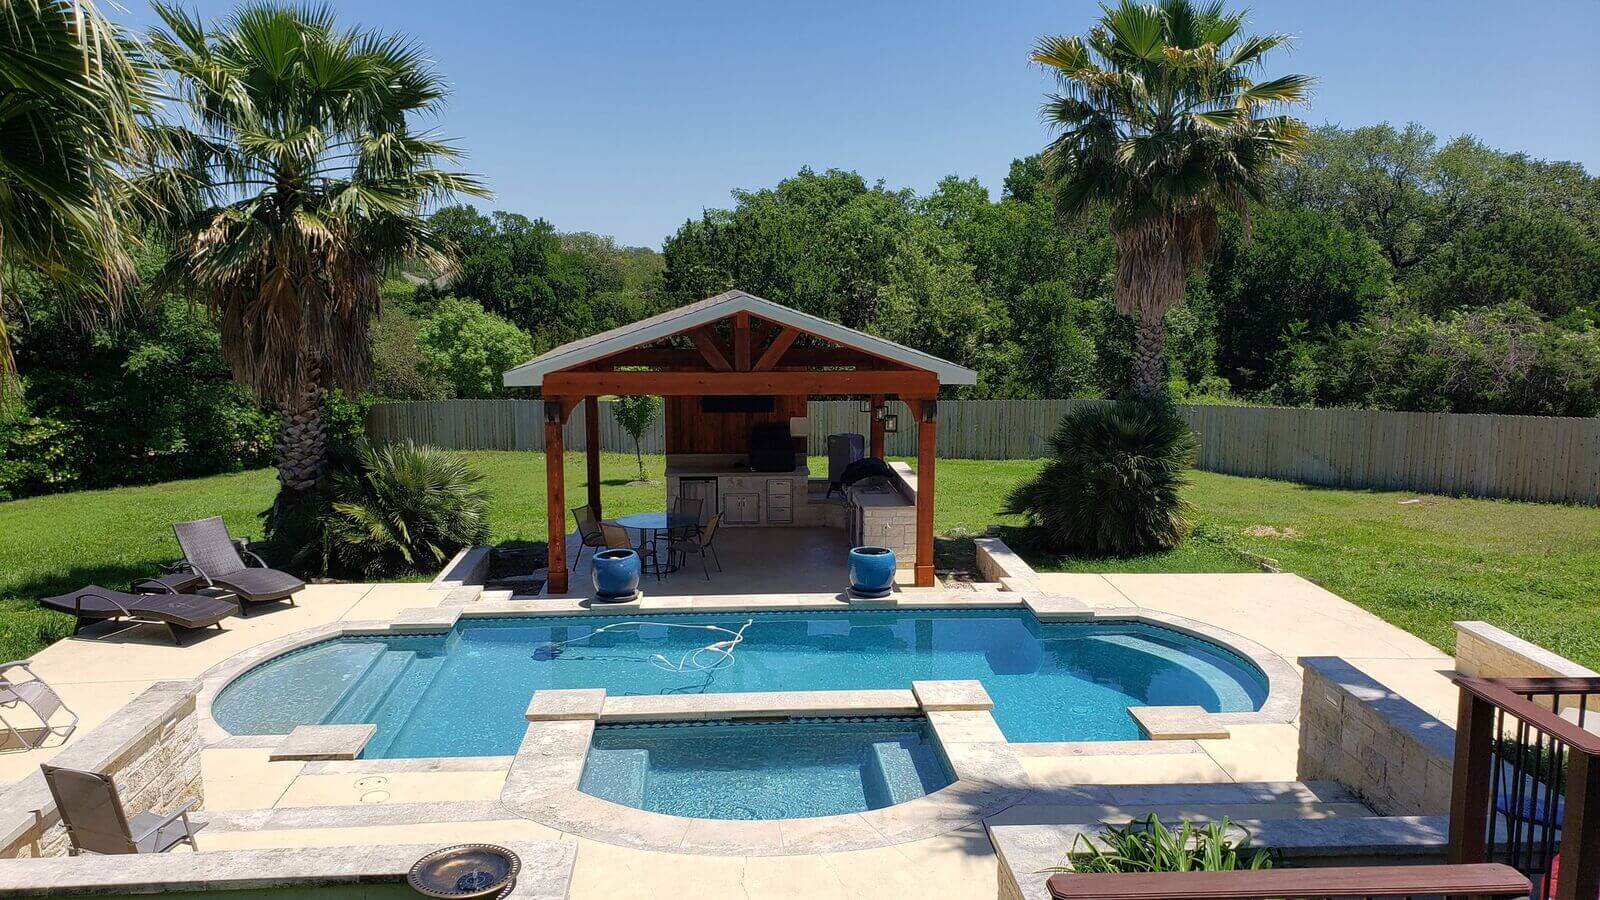 View of new backyard with pool and cabana with outdoor kitchen